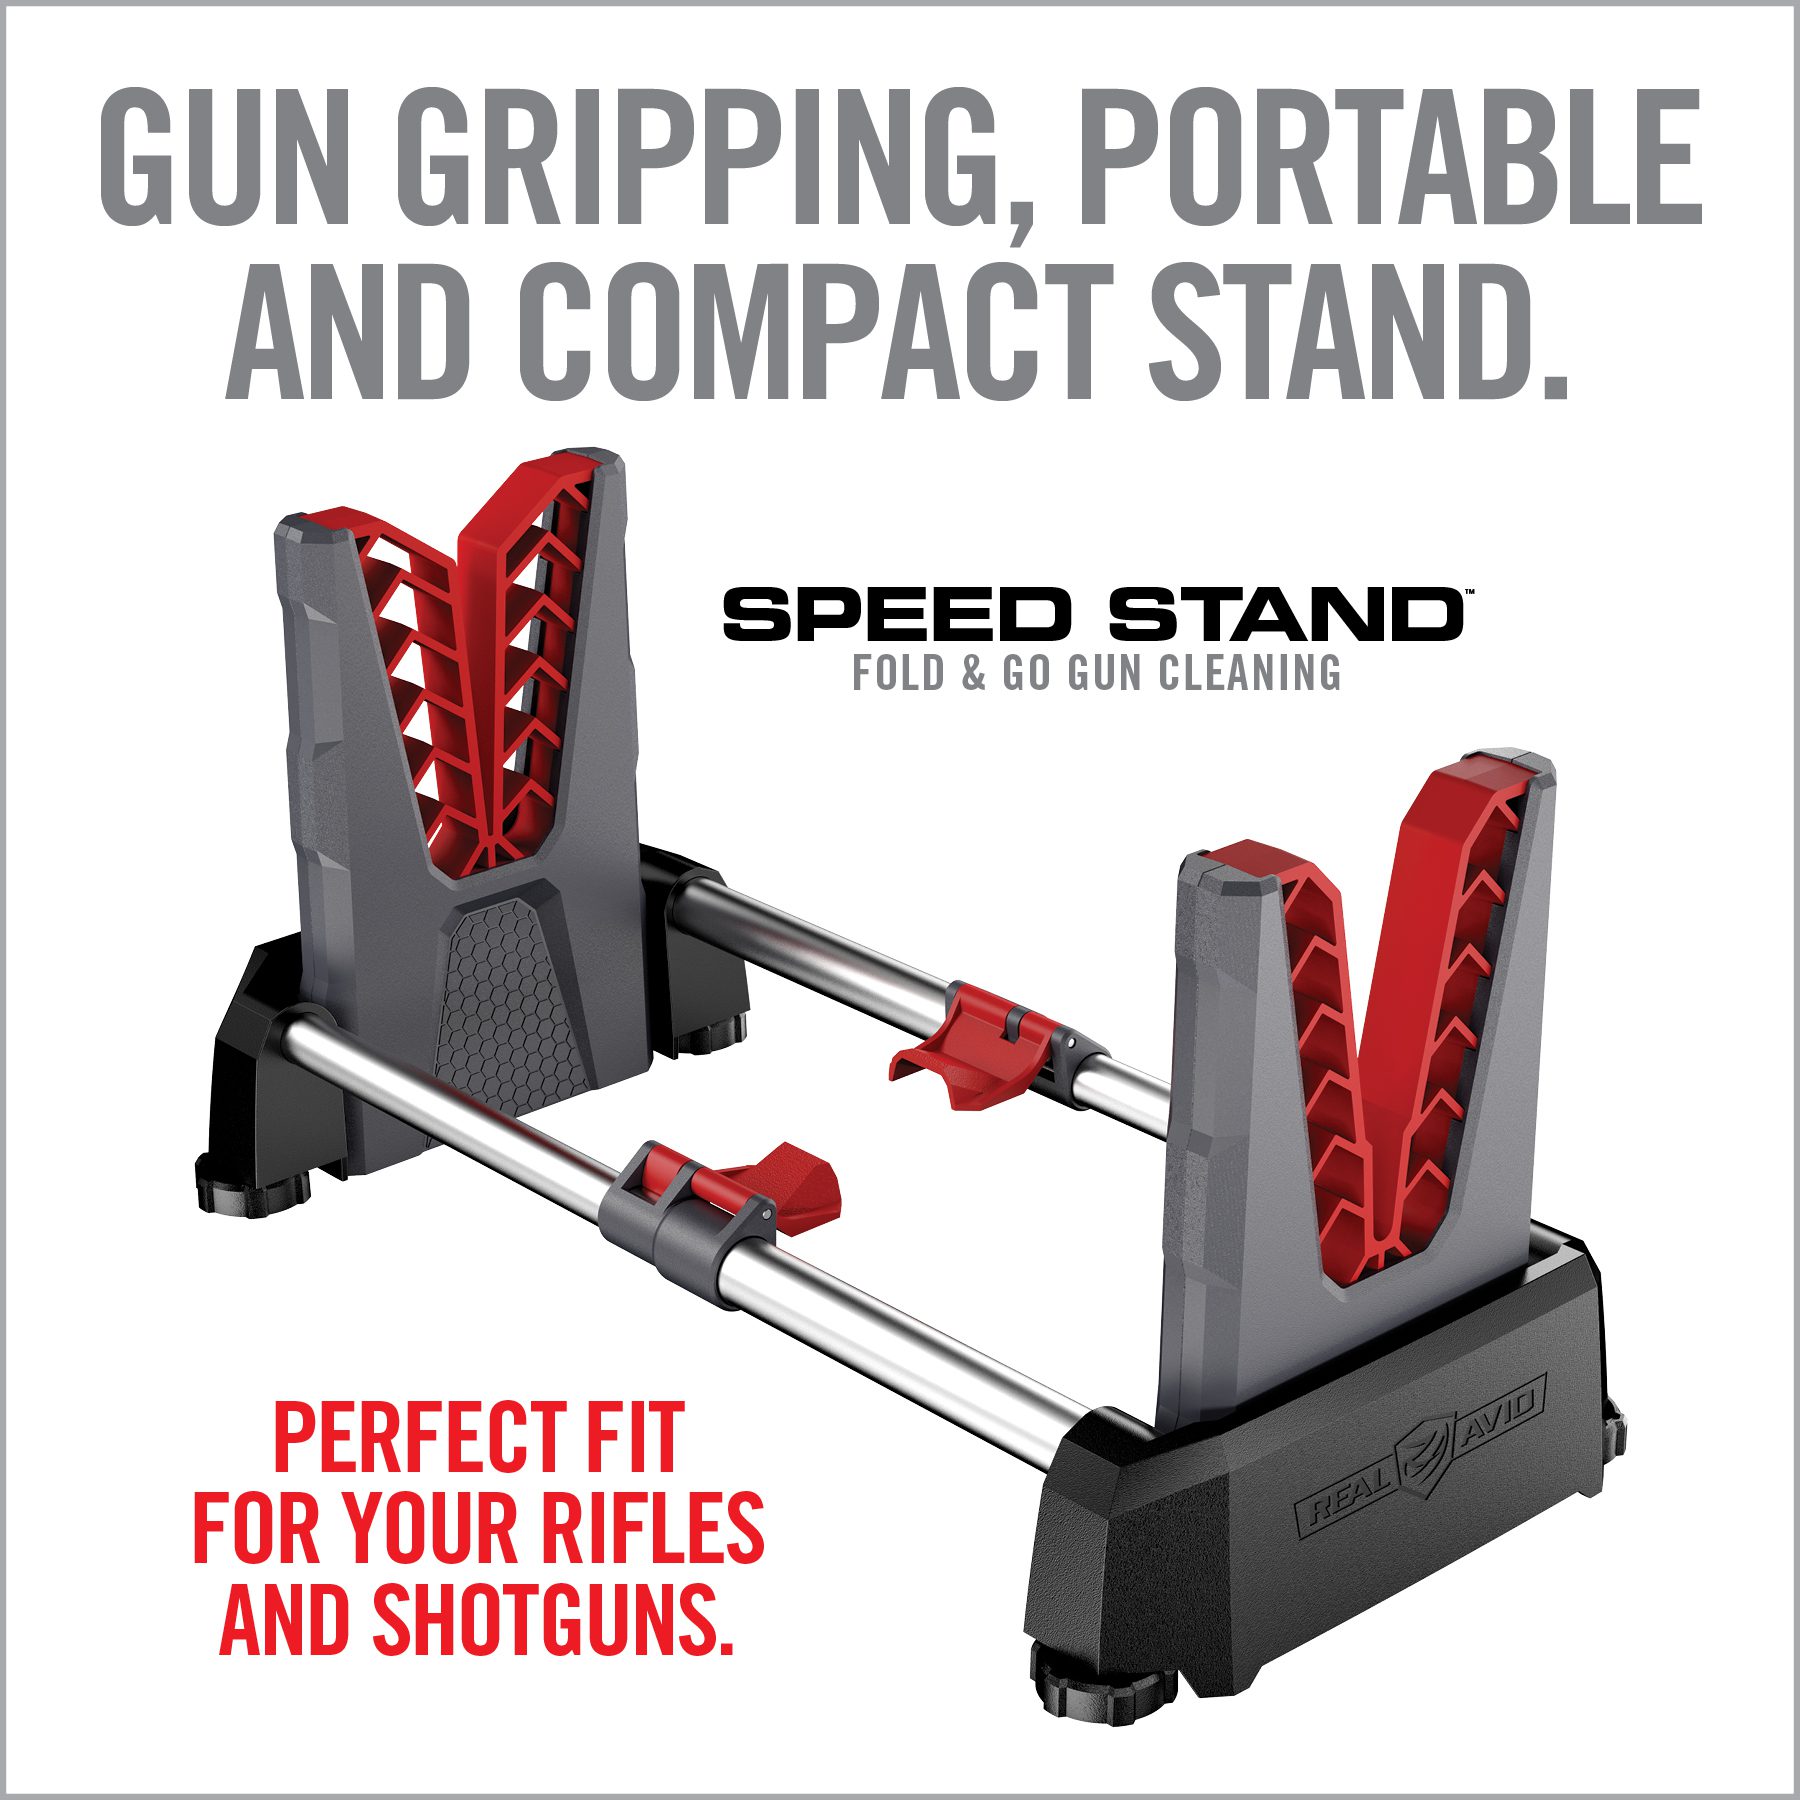 the gun gripping, portable and compact stand is perfect fit for your rifles and shotguns